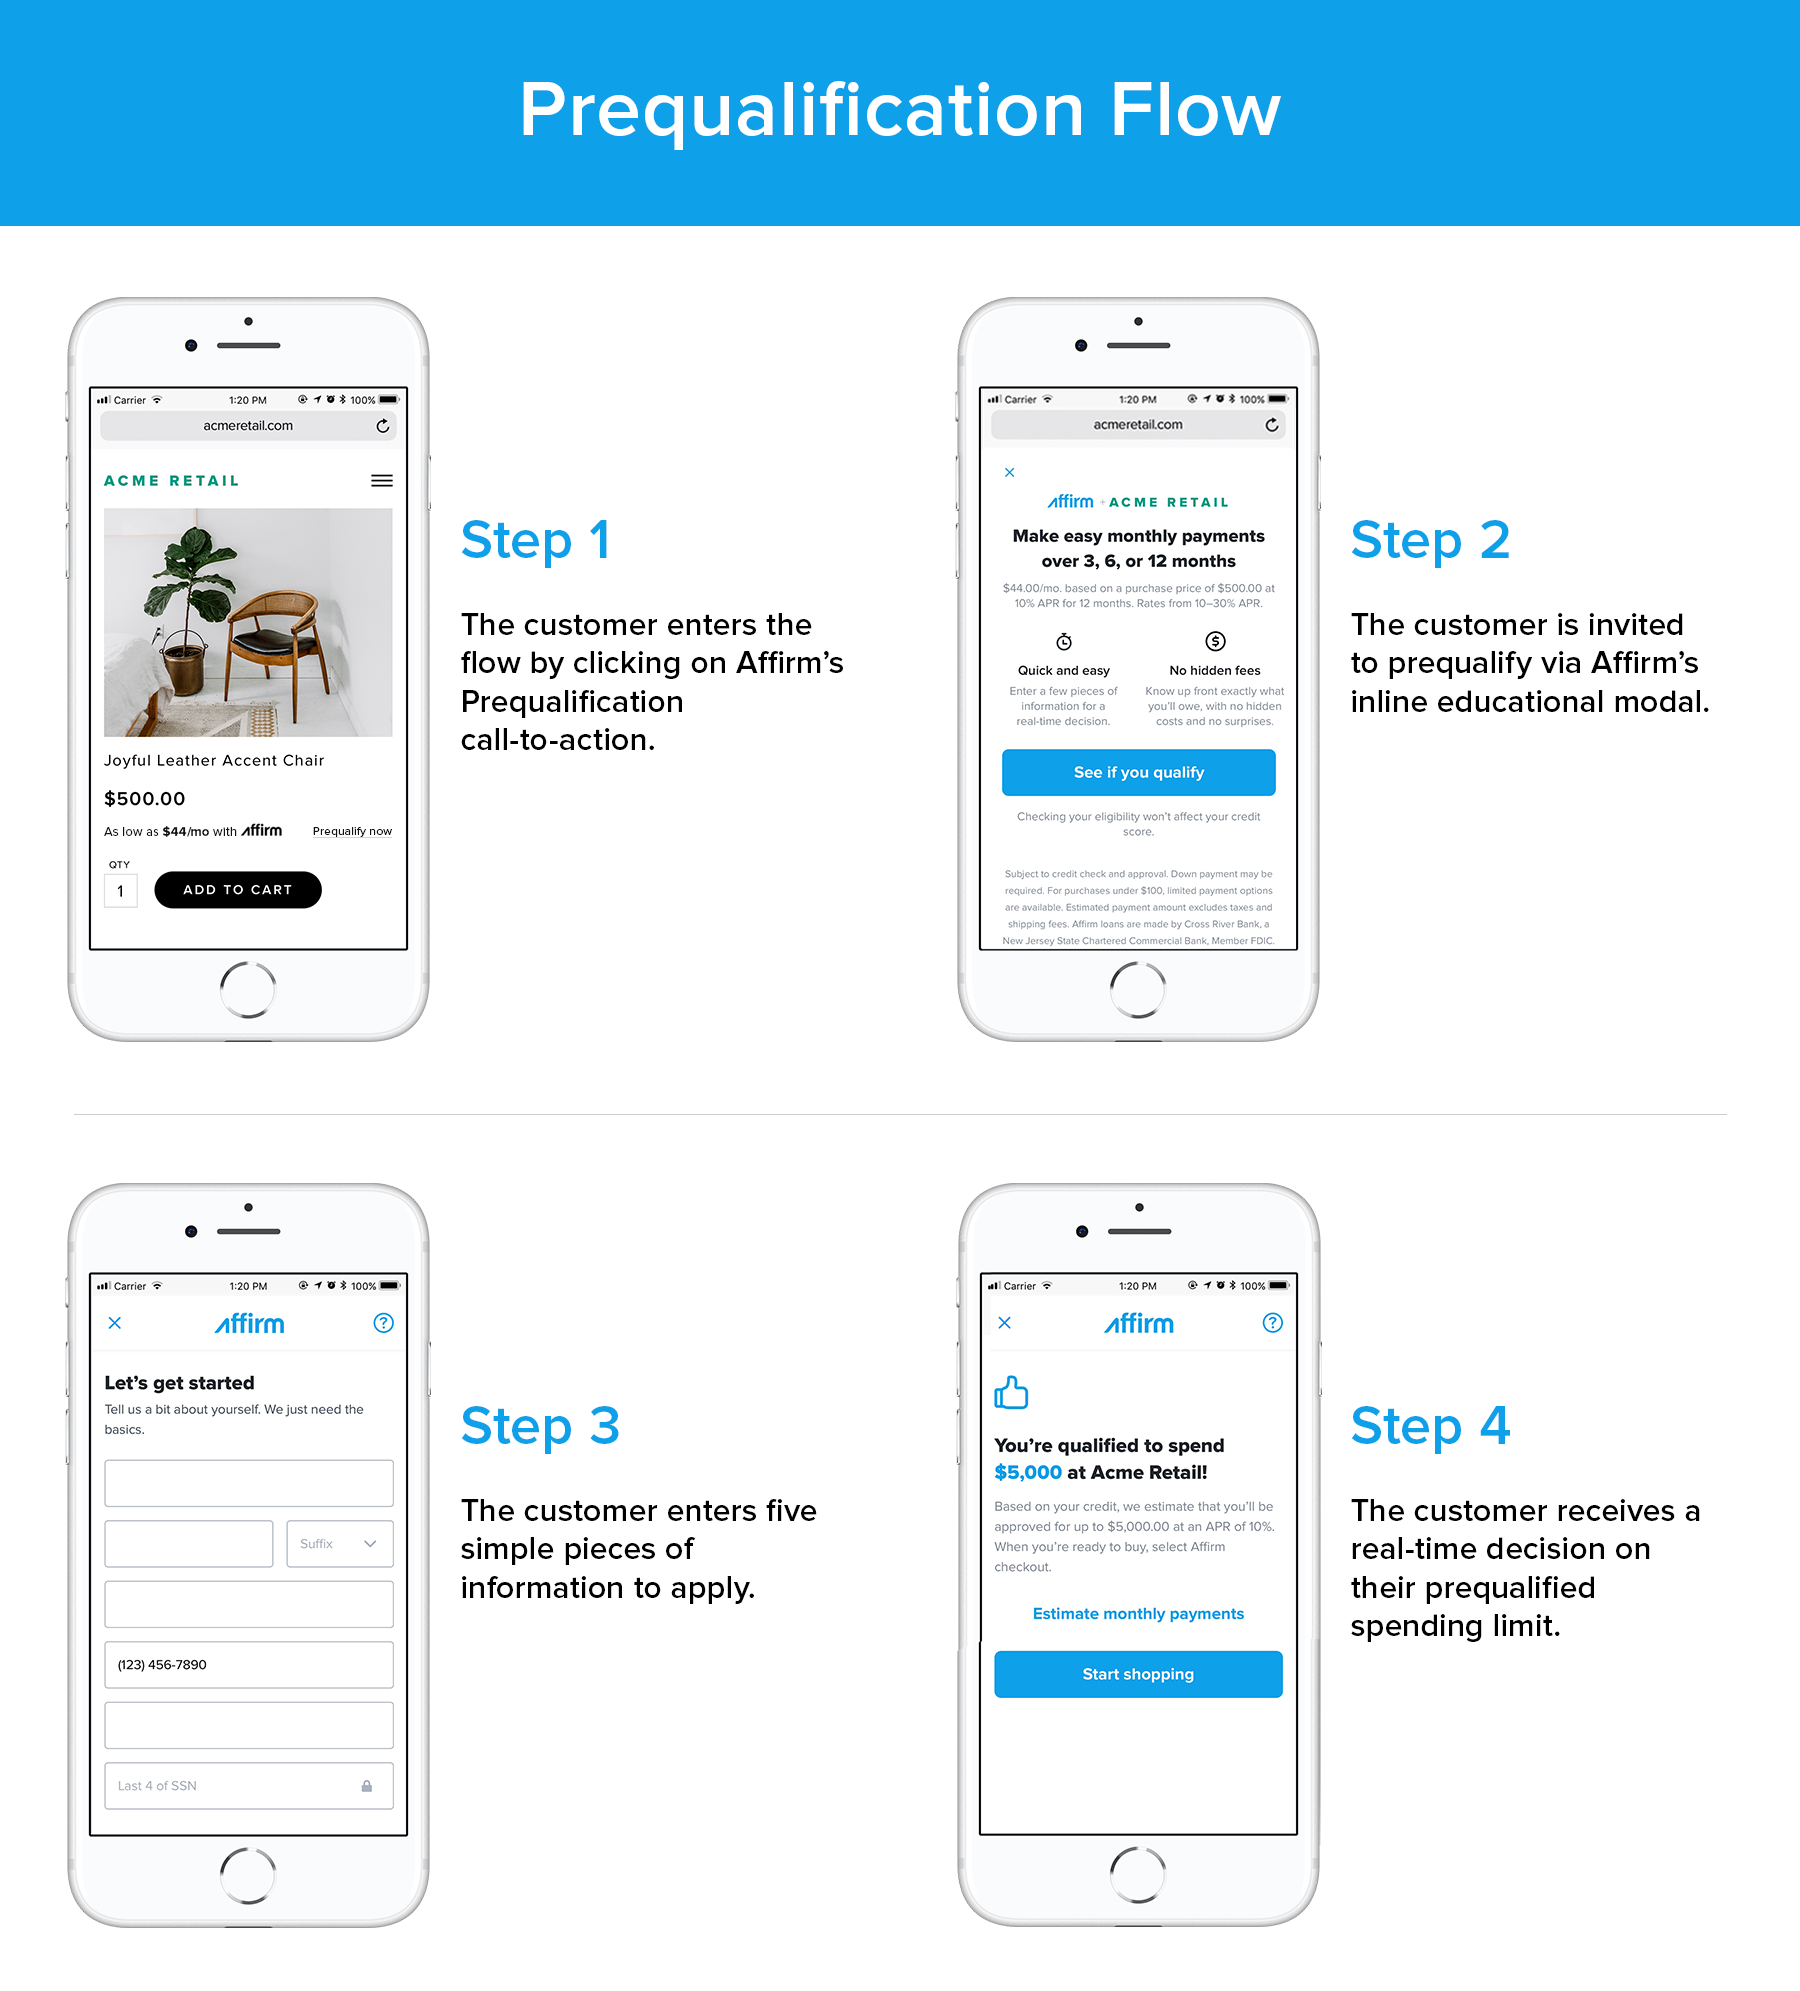 Introducing Affirm Prequalification - Image 1